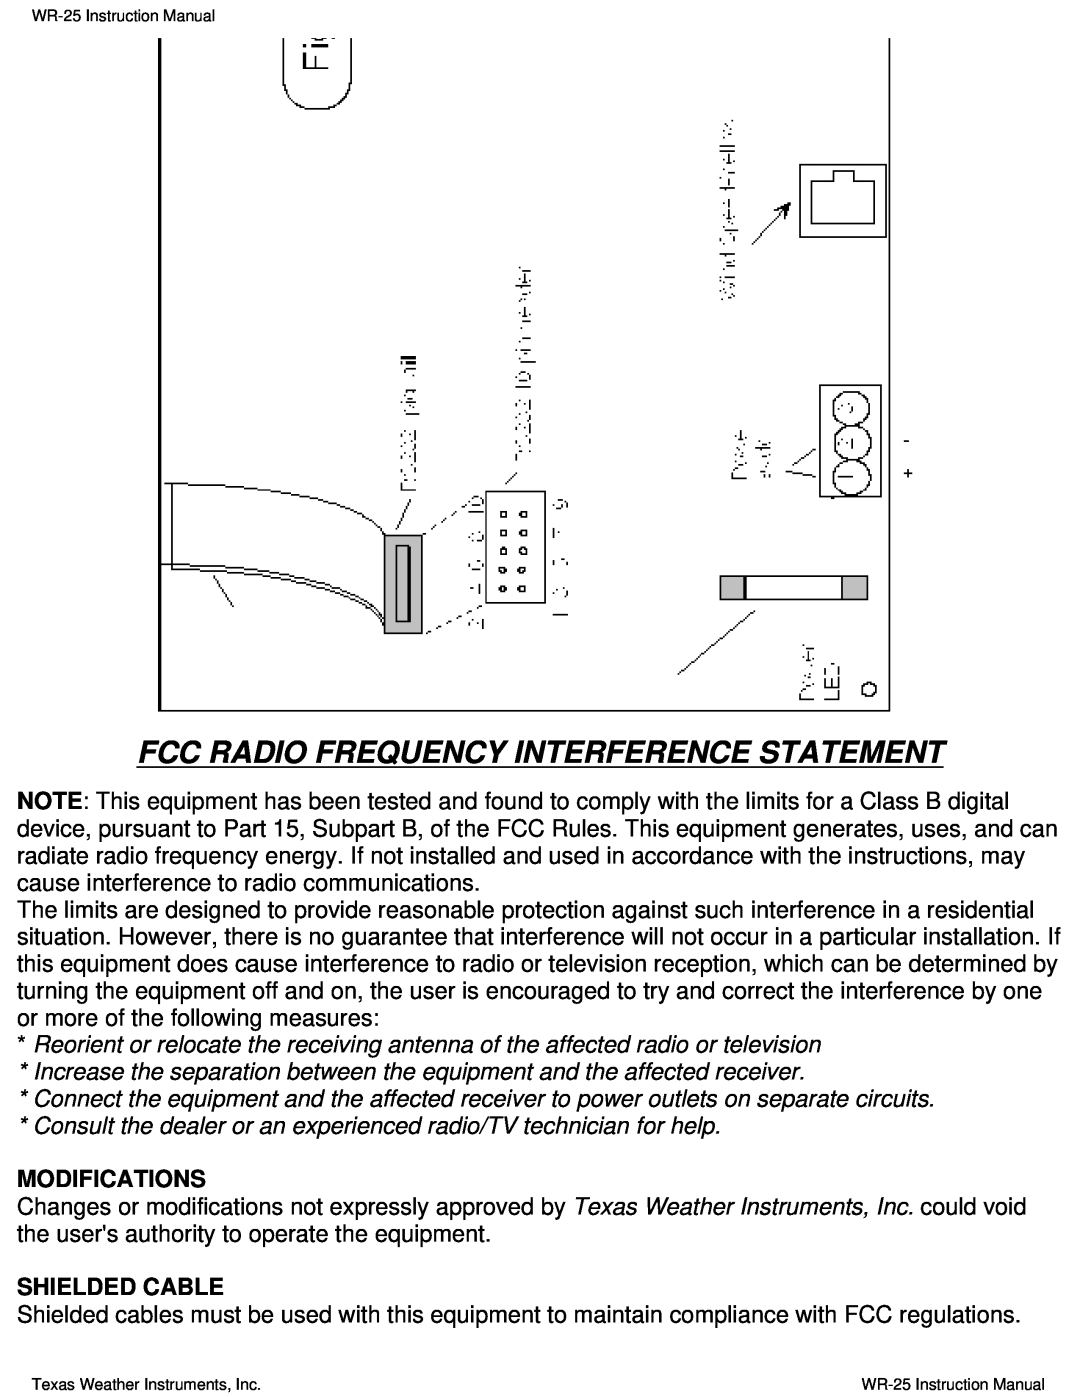 Texas Instruments WR-25 instruction manual Fcc Radio Frequency Interference Statement, Modifications, Shielded Cable 